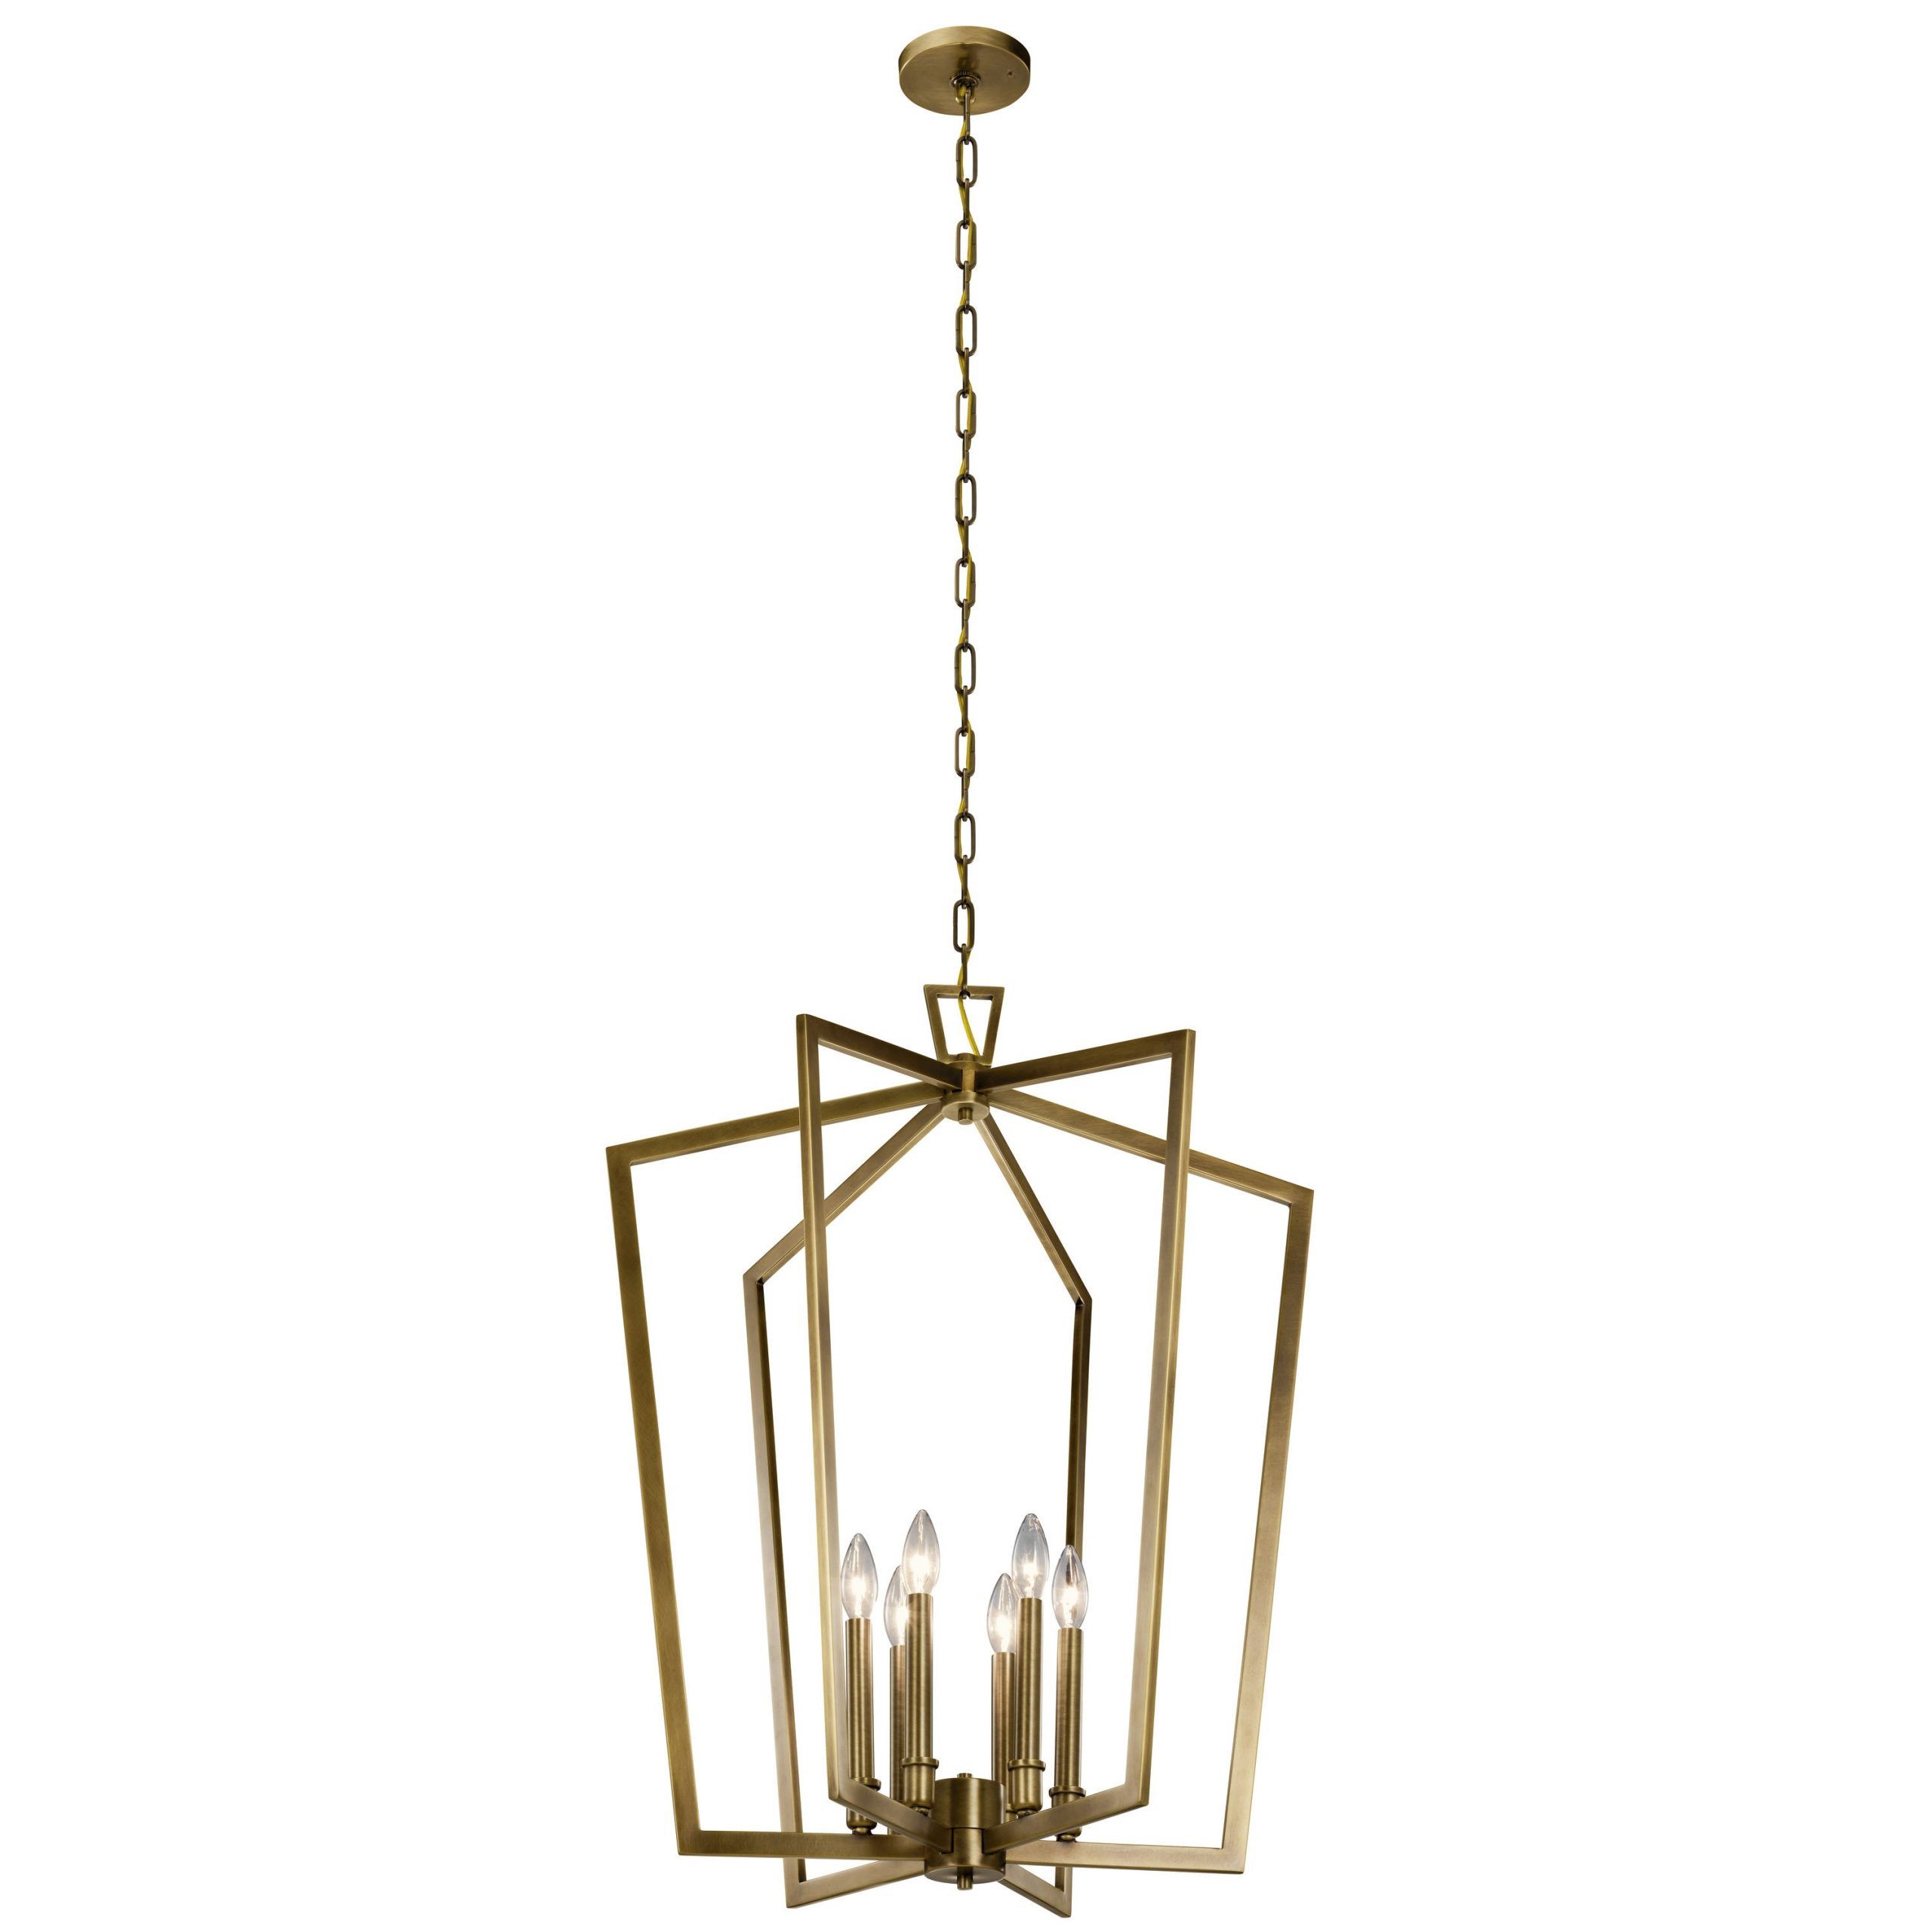 Kichler Abbotswell 6 Light Natural Brass Traditional Lantern Pendant Light  In The Pendant Lighting Department At Lowes Throughout Natural Brass Lantern Chandeliers (View 6 of 15)